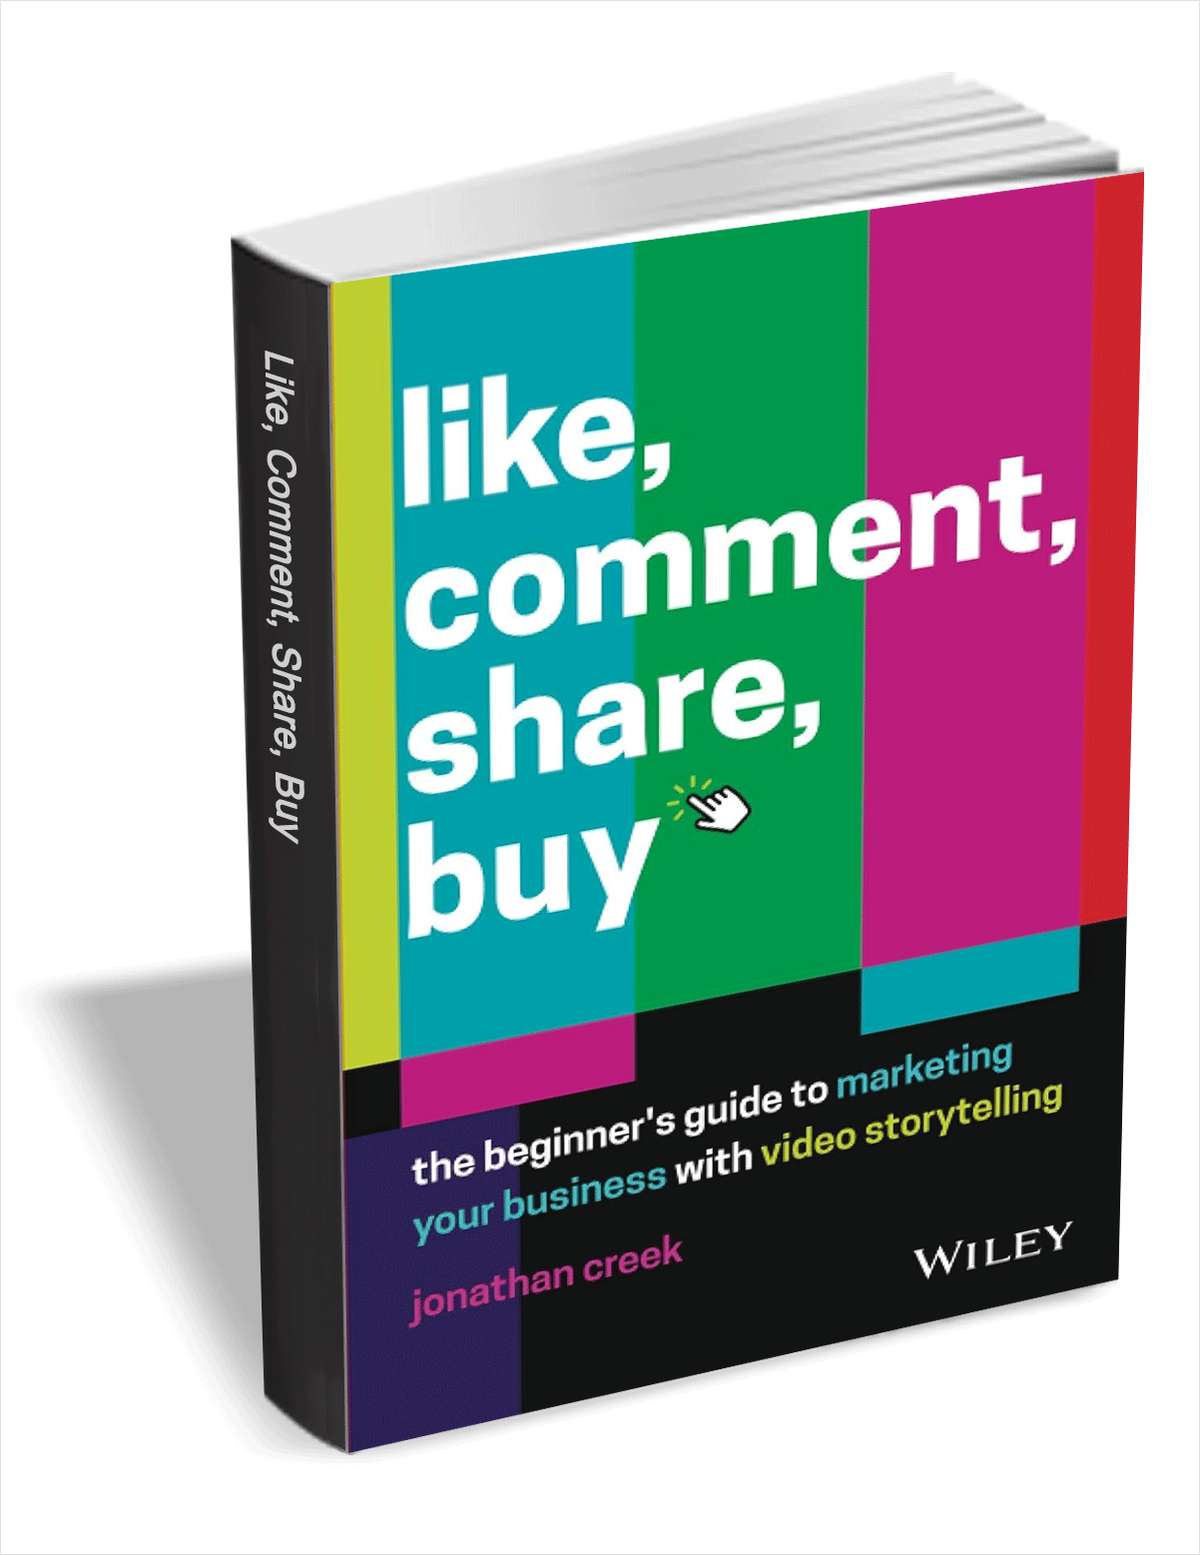 Like, Comment, Share, Buy: The Beginner's Guide to Marketing Your Business with Video Storytelling ($12.00 Value) FREE for a Limited Time